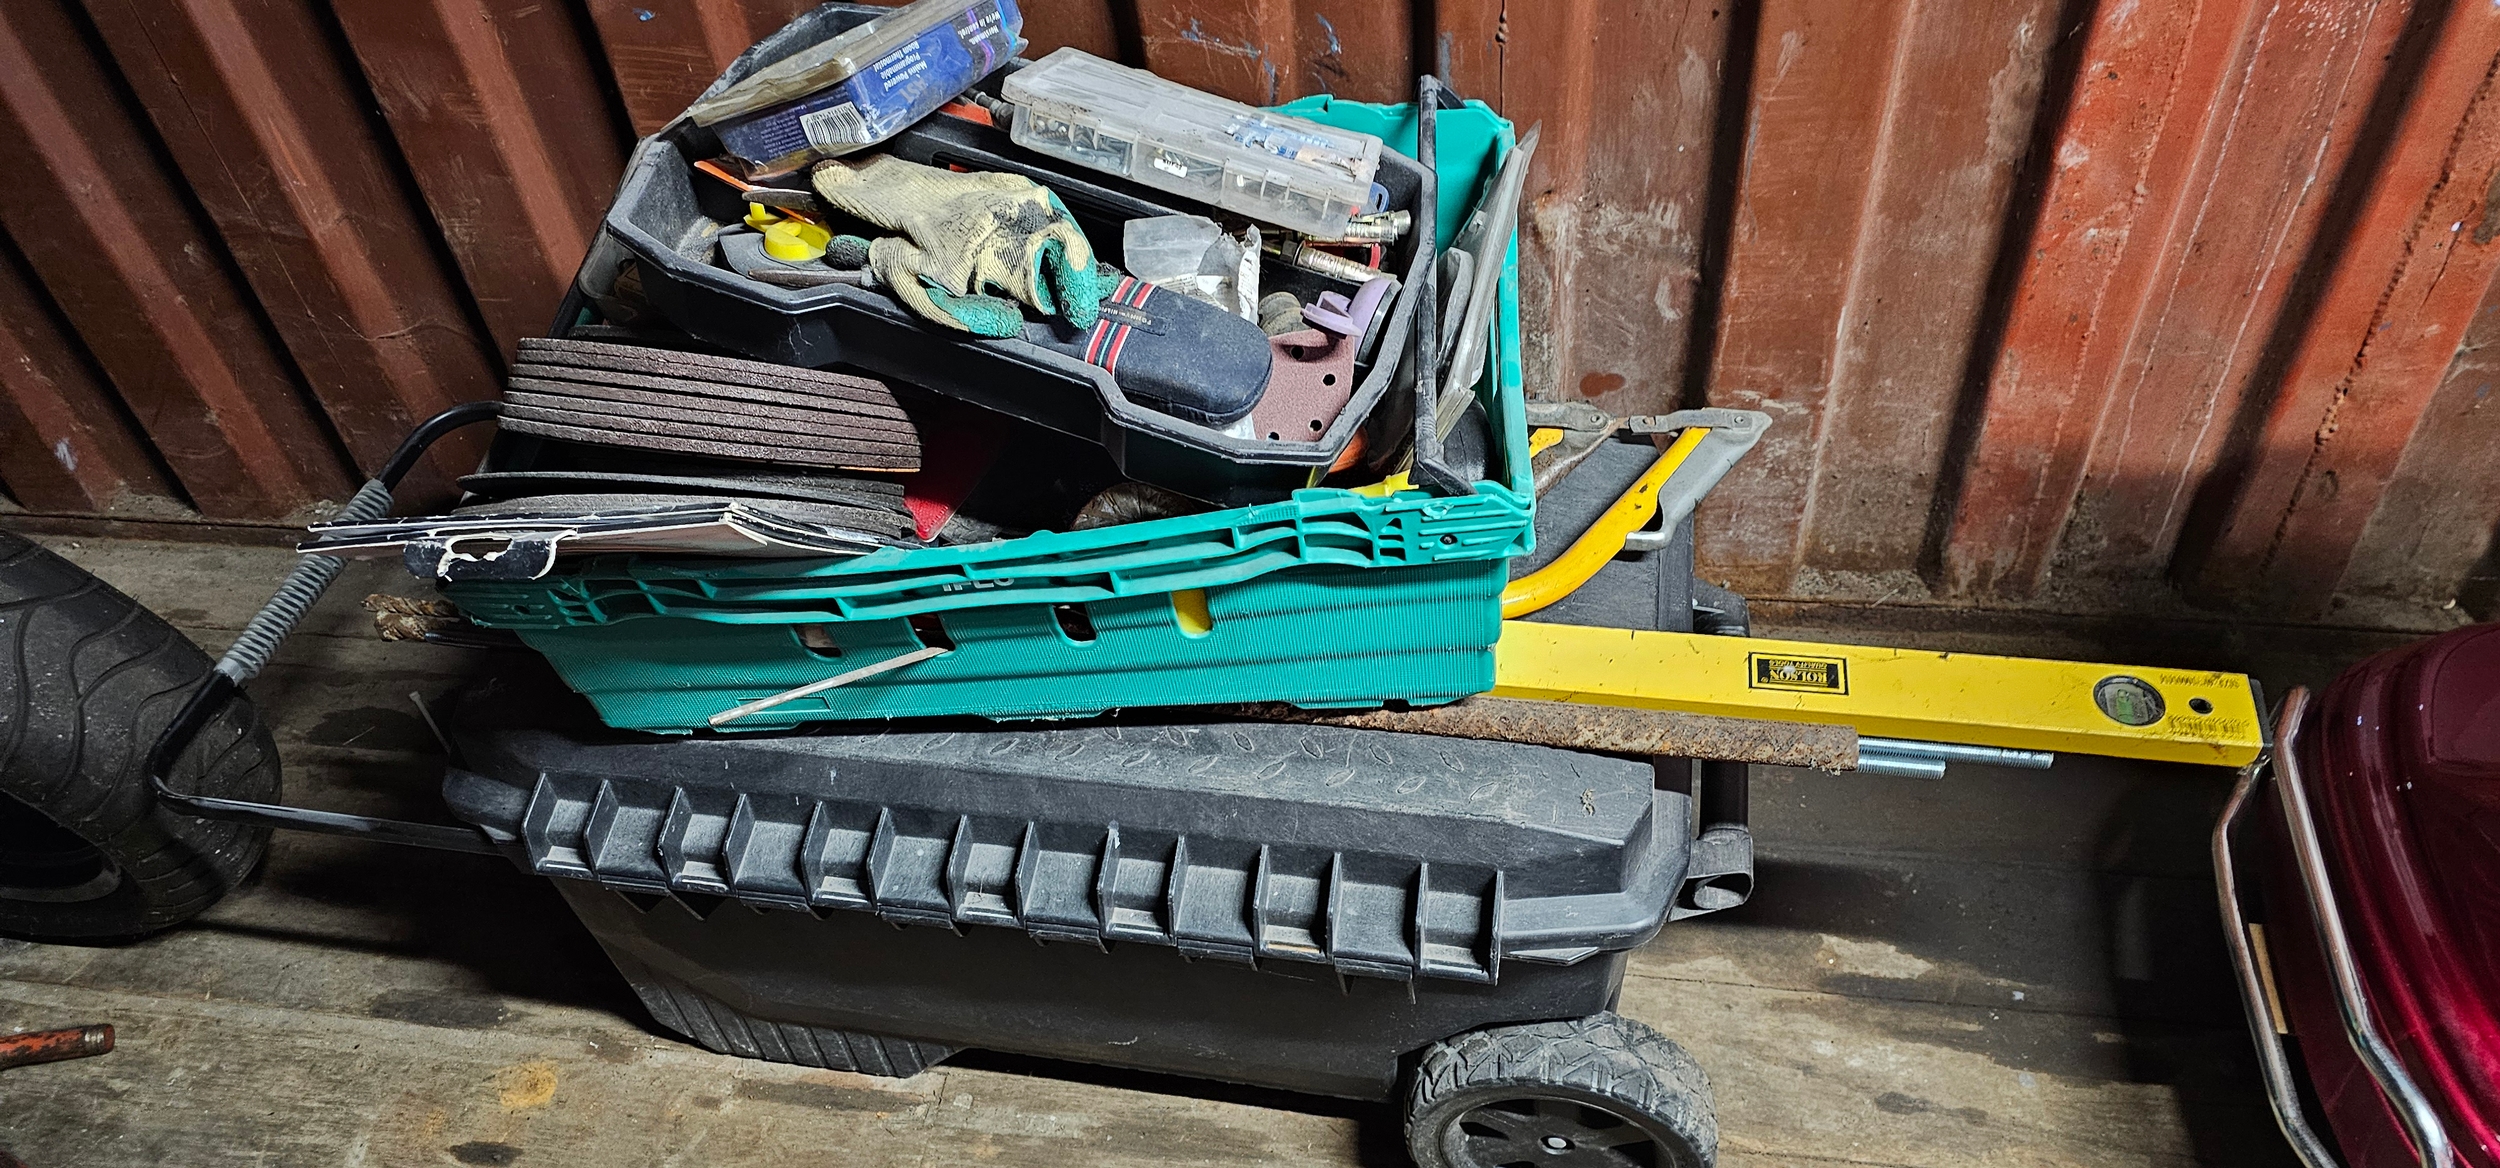 A Stanley Fatmax tool box and a quantity of used tools